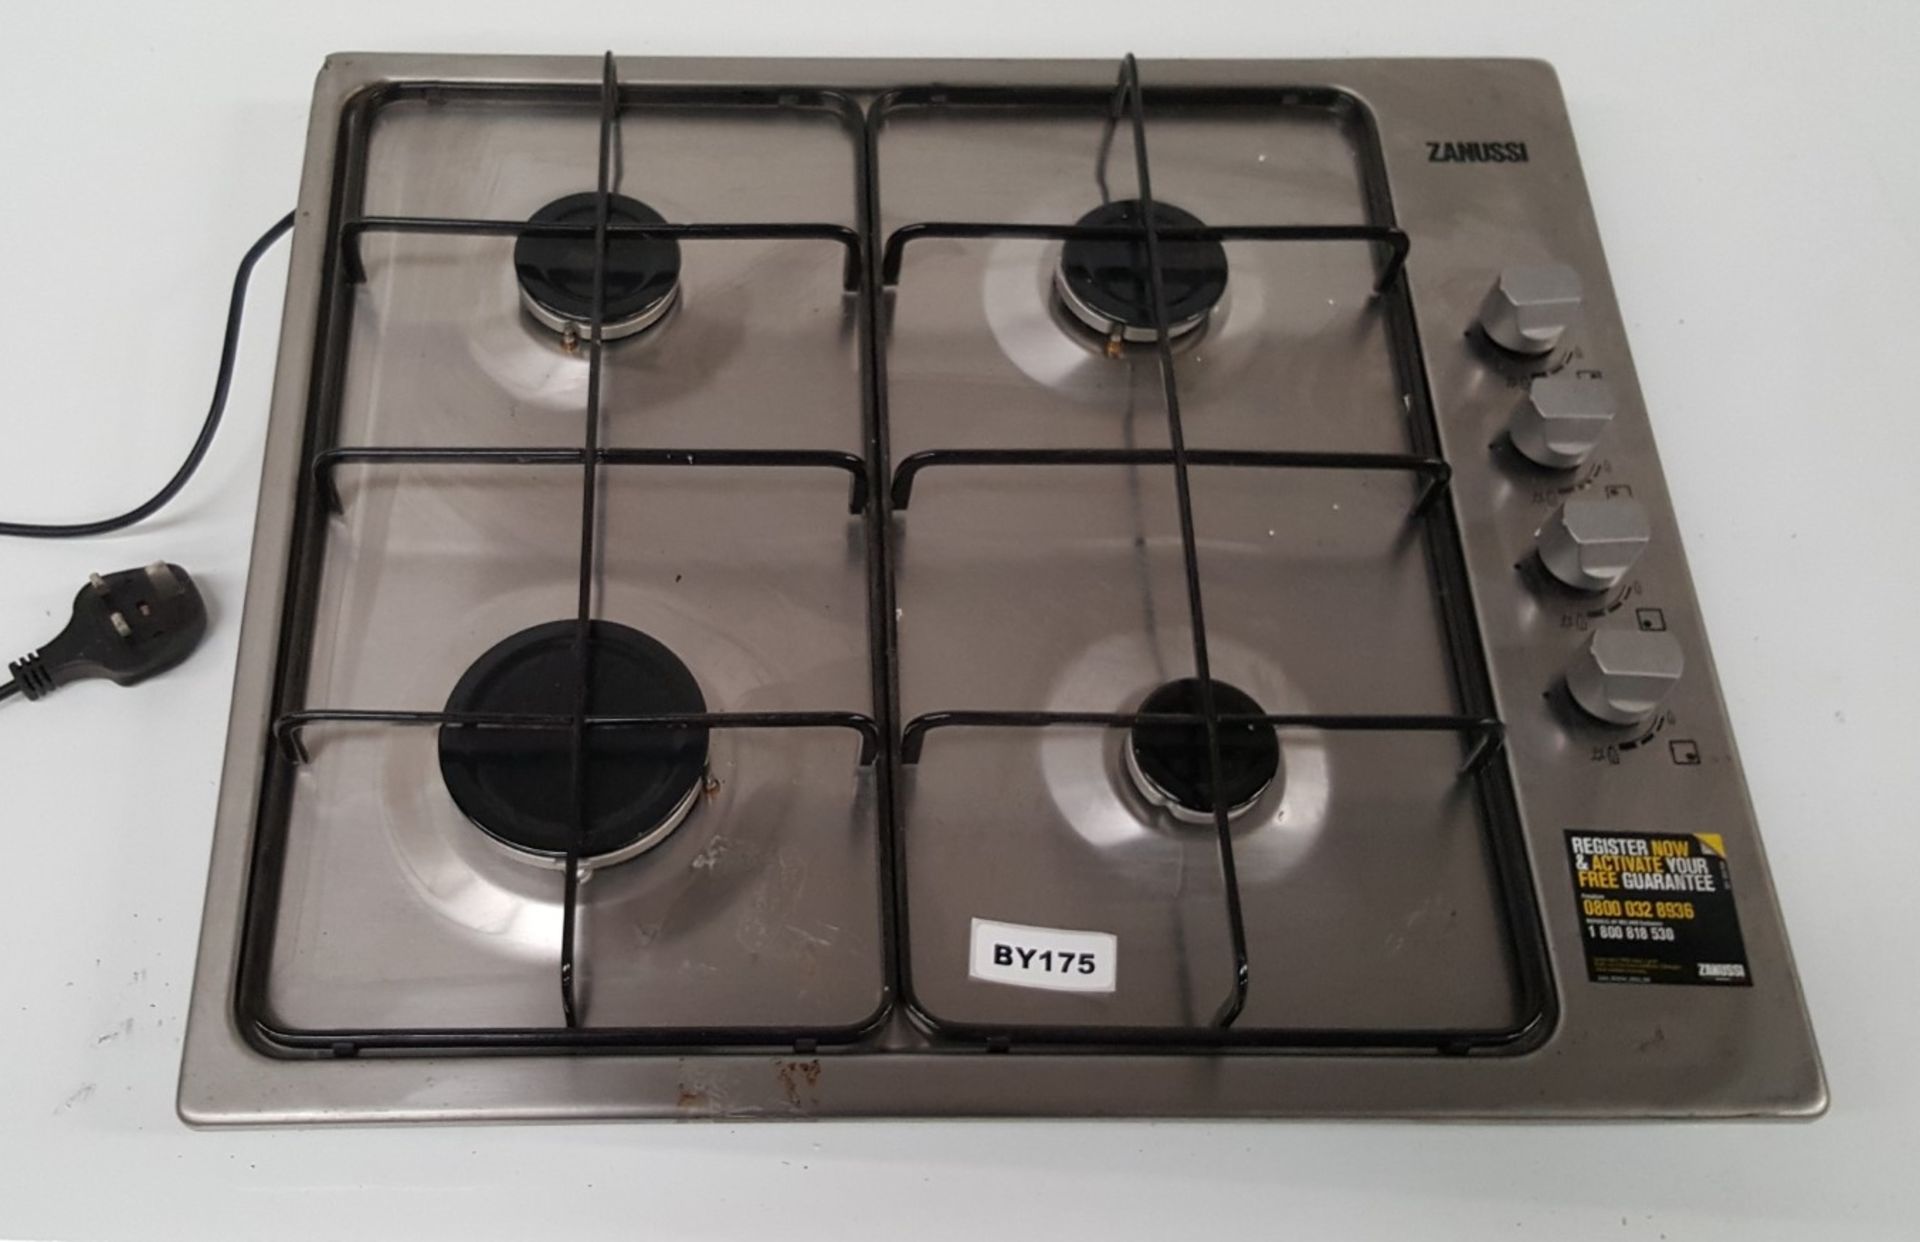 1 x Zanussi 58cm Gas Hob Stainless Steel ZGH62414XS - Ref BY175 - Image 2 of 4